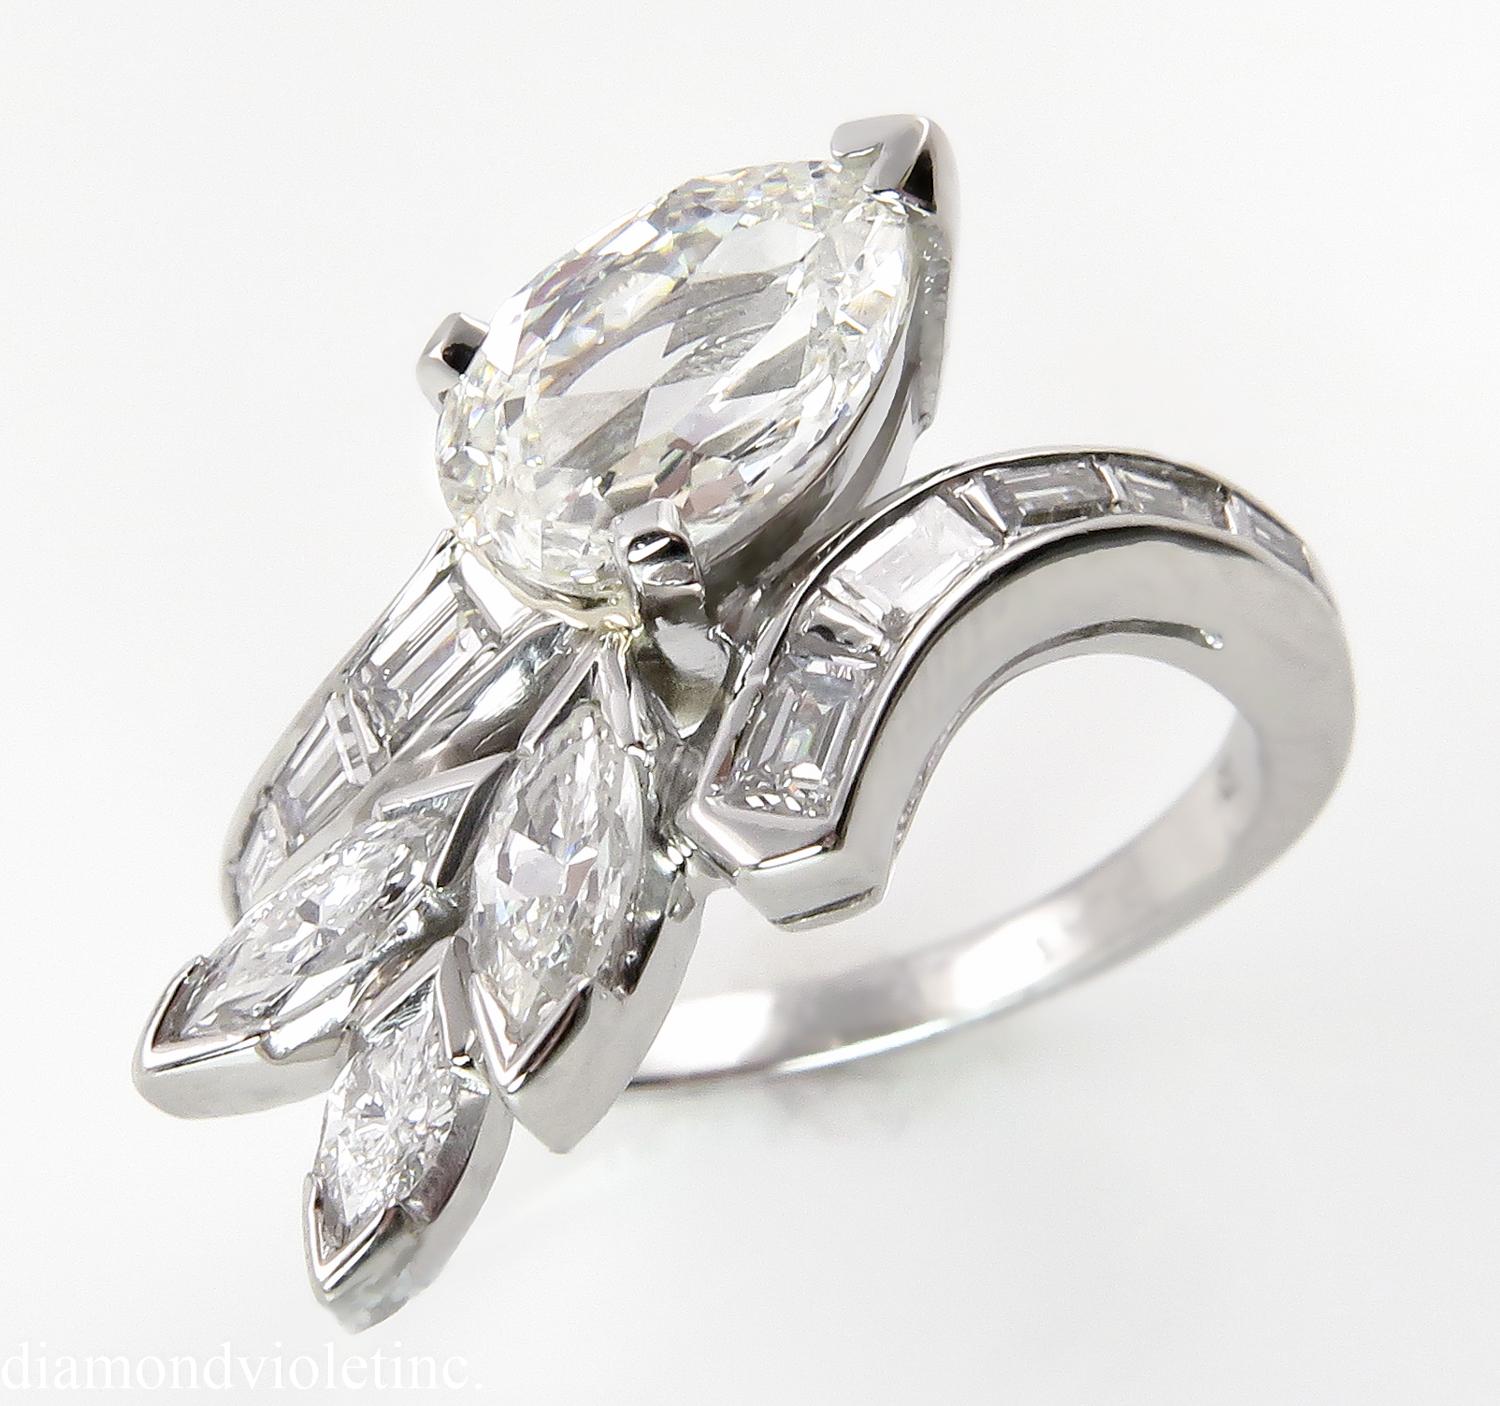 An Amazing and Important Estate Engagement Handmade Platinum (stamped) Ring with GIA Certified 1.05CT Old cut Pear Shape Center Diamond in J color VS1 clarity (Near COLORLESS and Very clear). The Measurements of the Center Diamond are